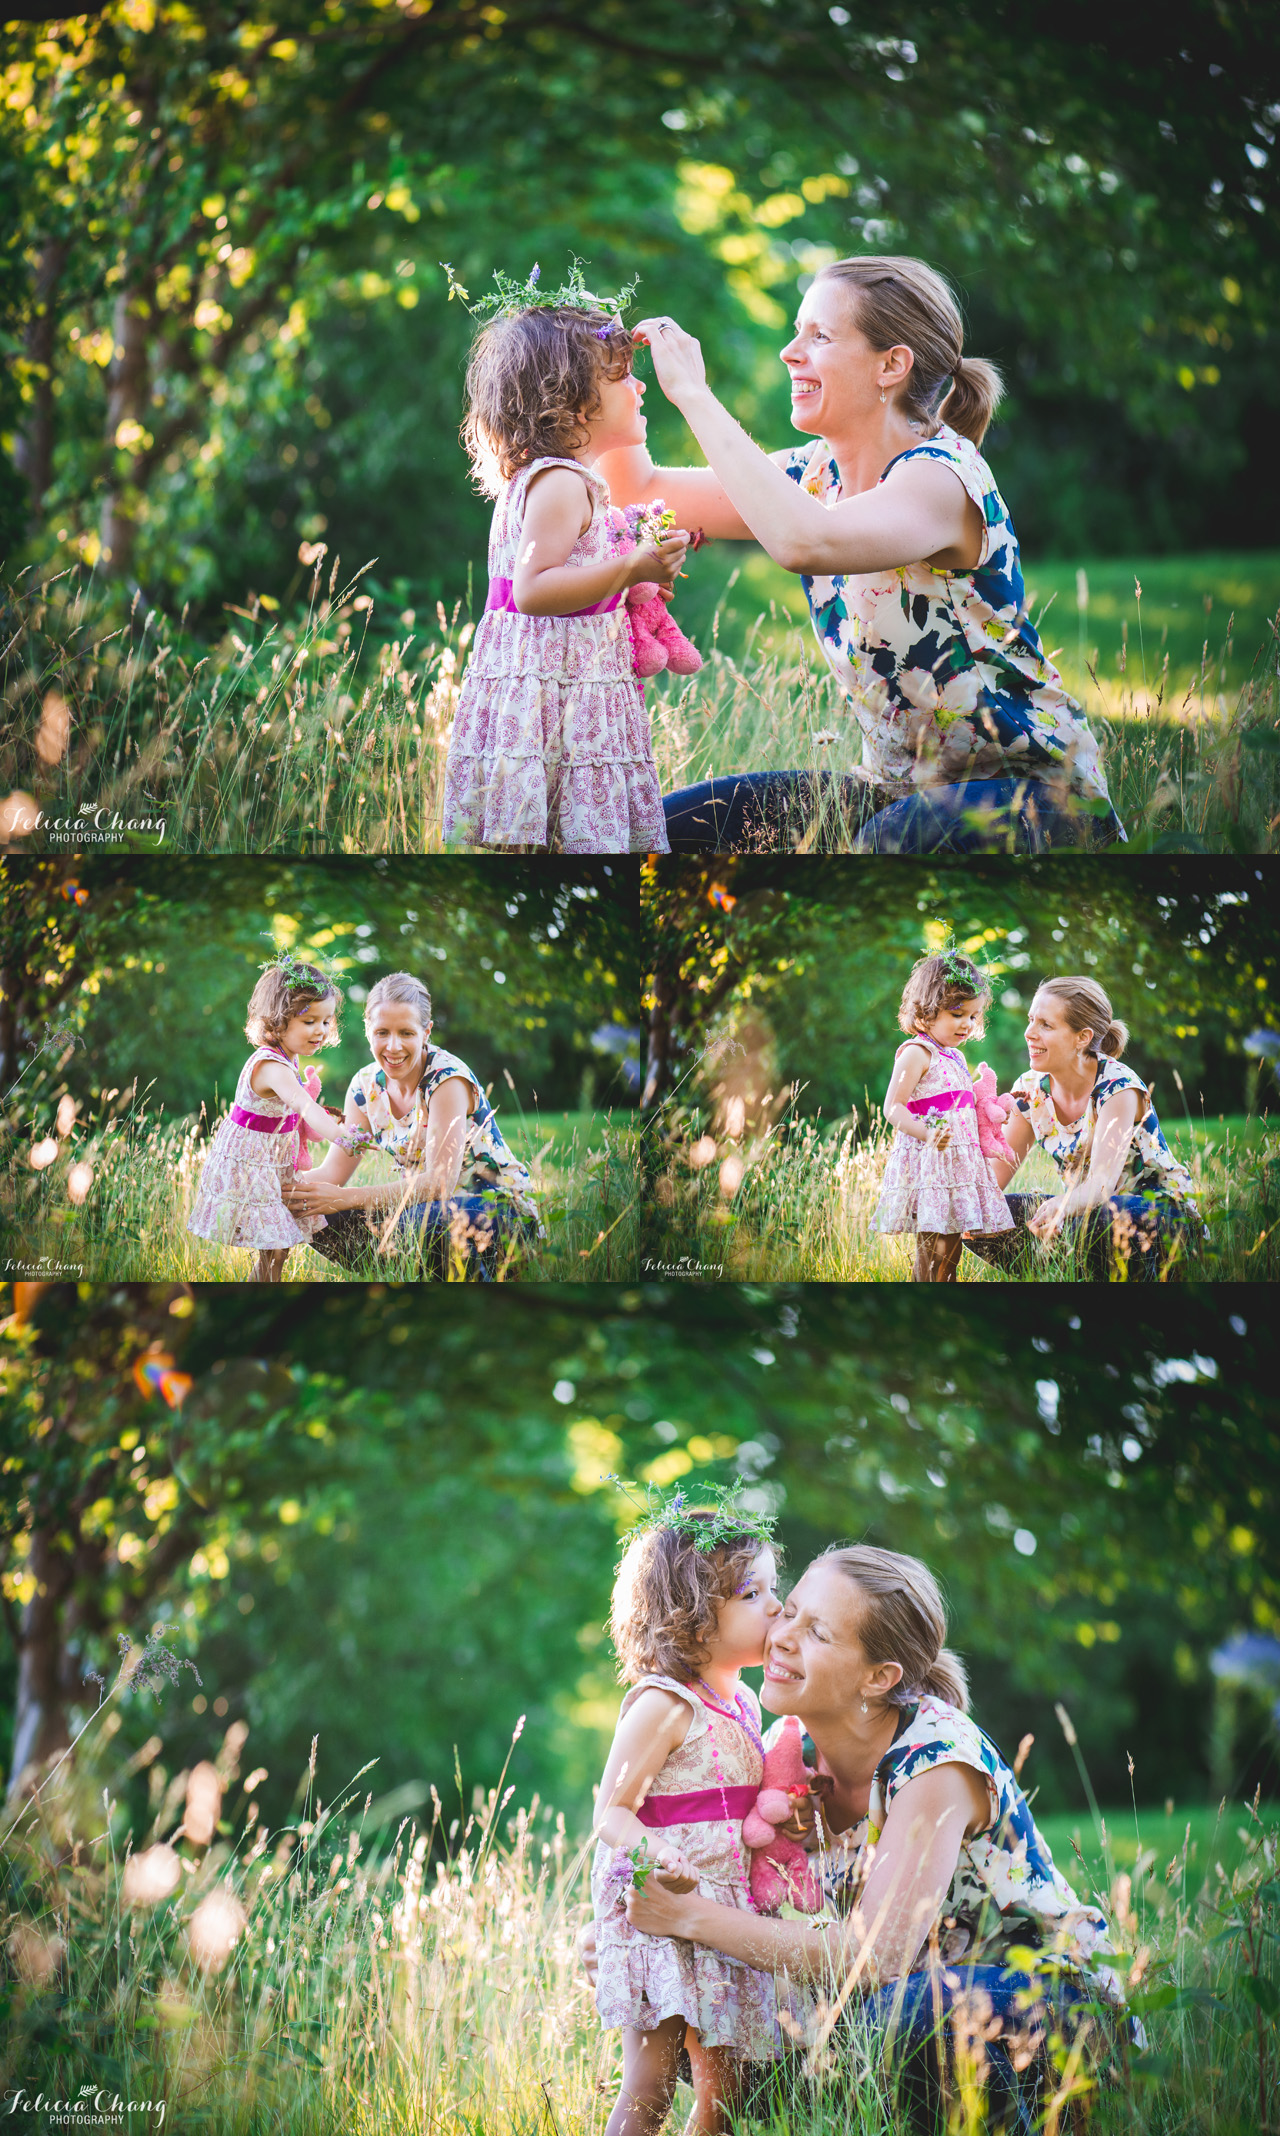 Mom + daughter with flower crown, West Vancouver Family Photographer, Felicia Chang Photography